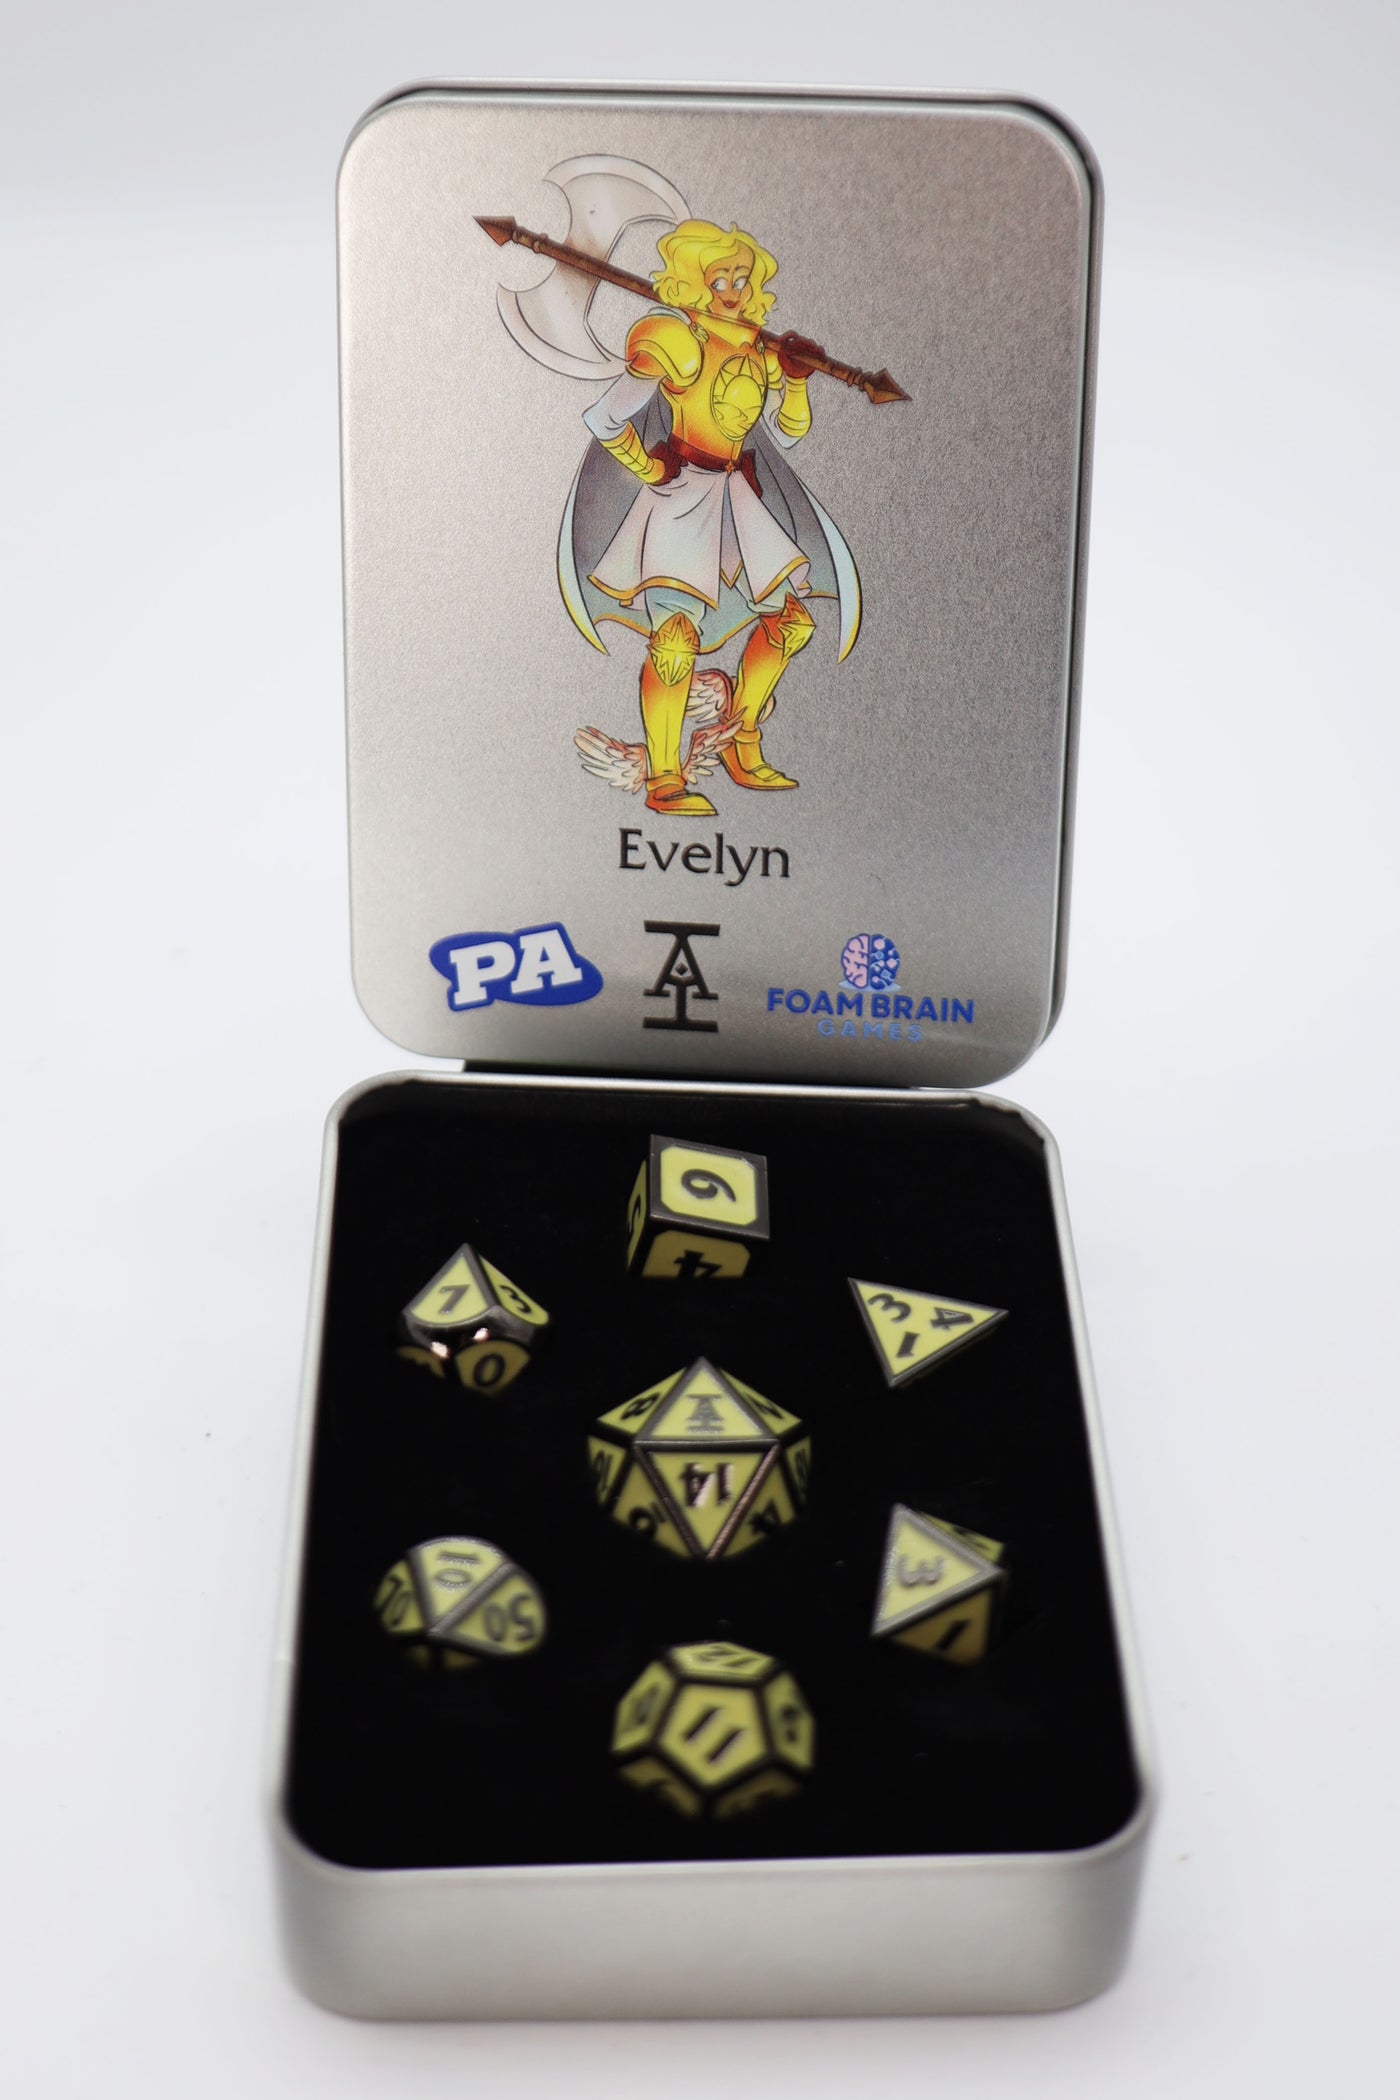 Evelyn (Acquisitions Inc. PAX West 2023 Character Dice) Metal Dice Foam Brain Games